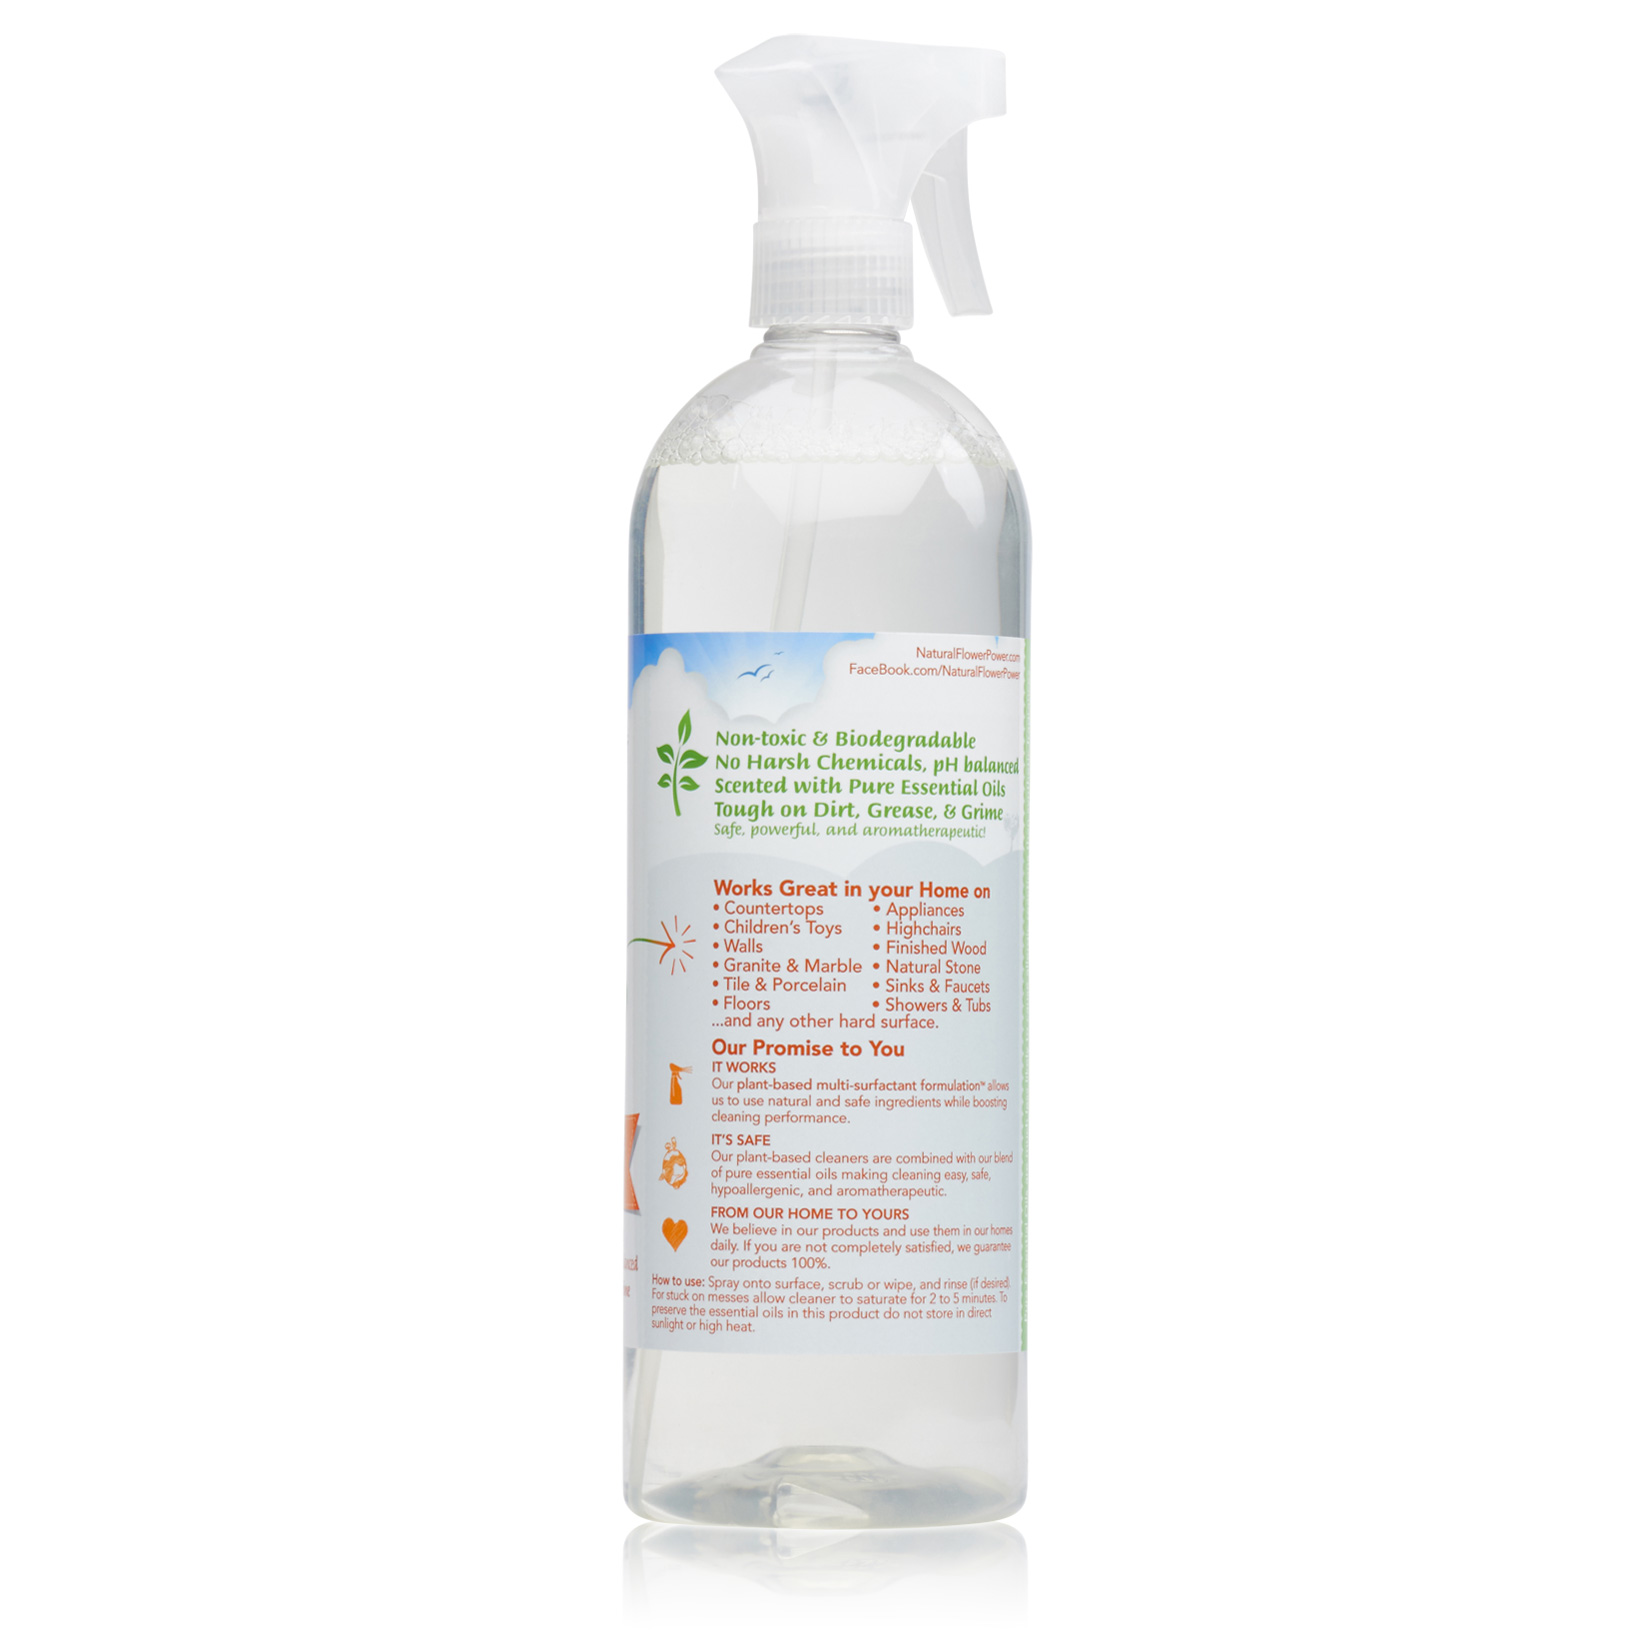 Silk Flower & Plant Cleaner, 12 oz. – Capital Books and Wellness